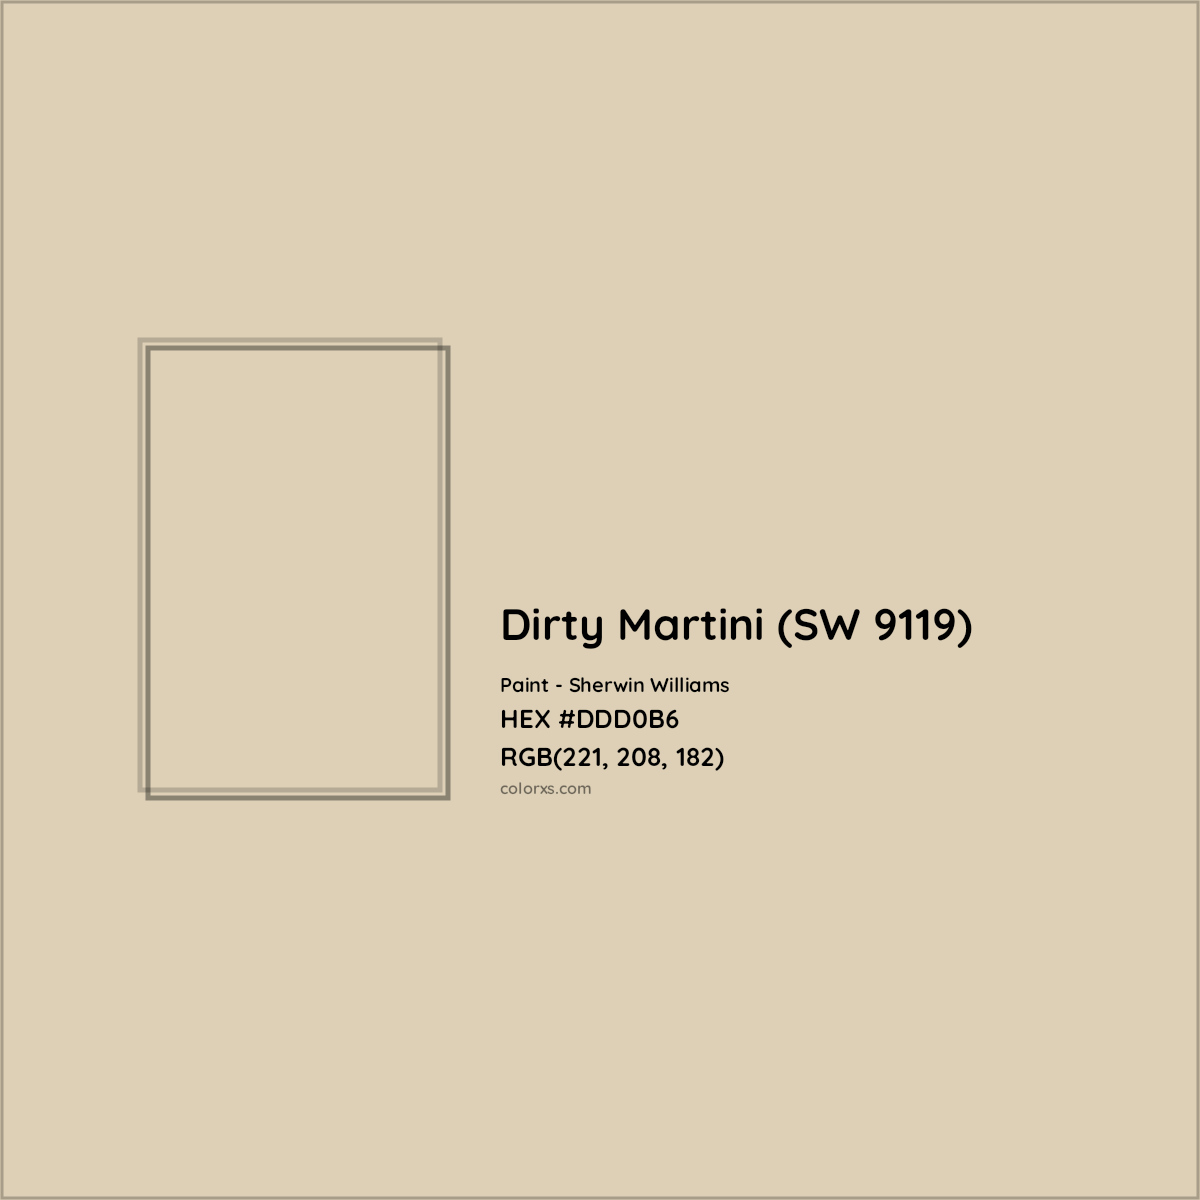 HEX #DDD0B6 Dirty Martini (SW 9119) Paint Sherwin Williams - Color Code